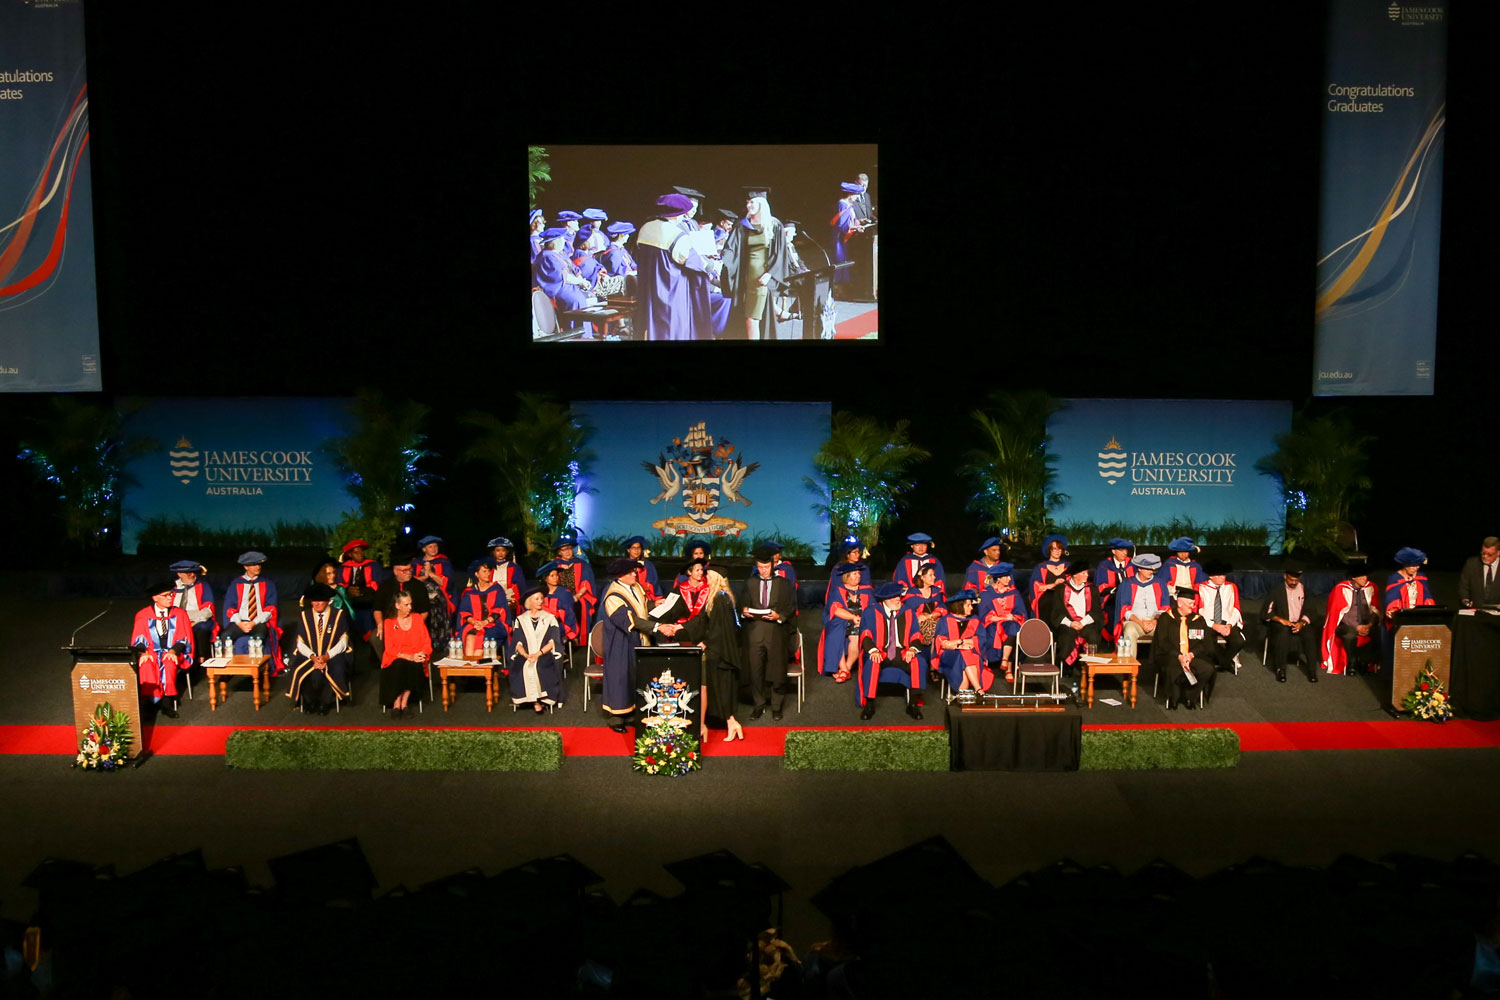 Long shot of the stage as a grad shakes hands with the chancellor